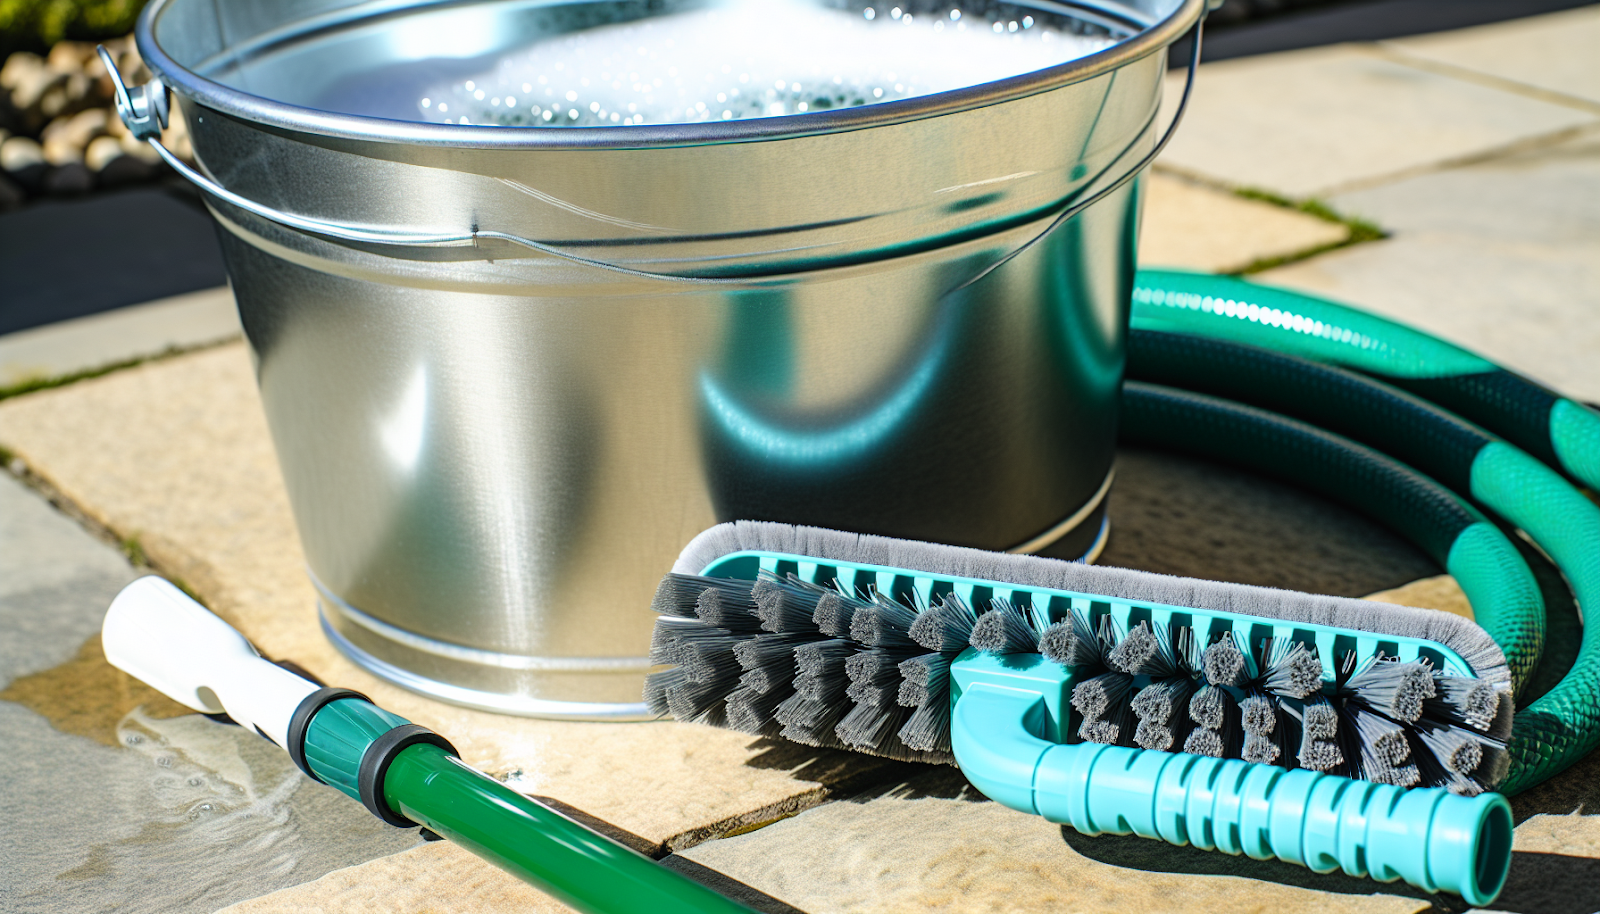 Bucket, brush, and garden hose for patio cleaning essentials